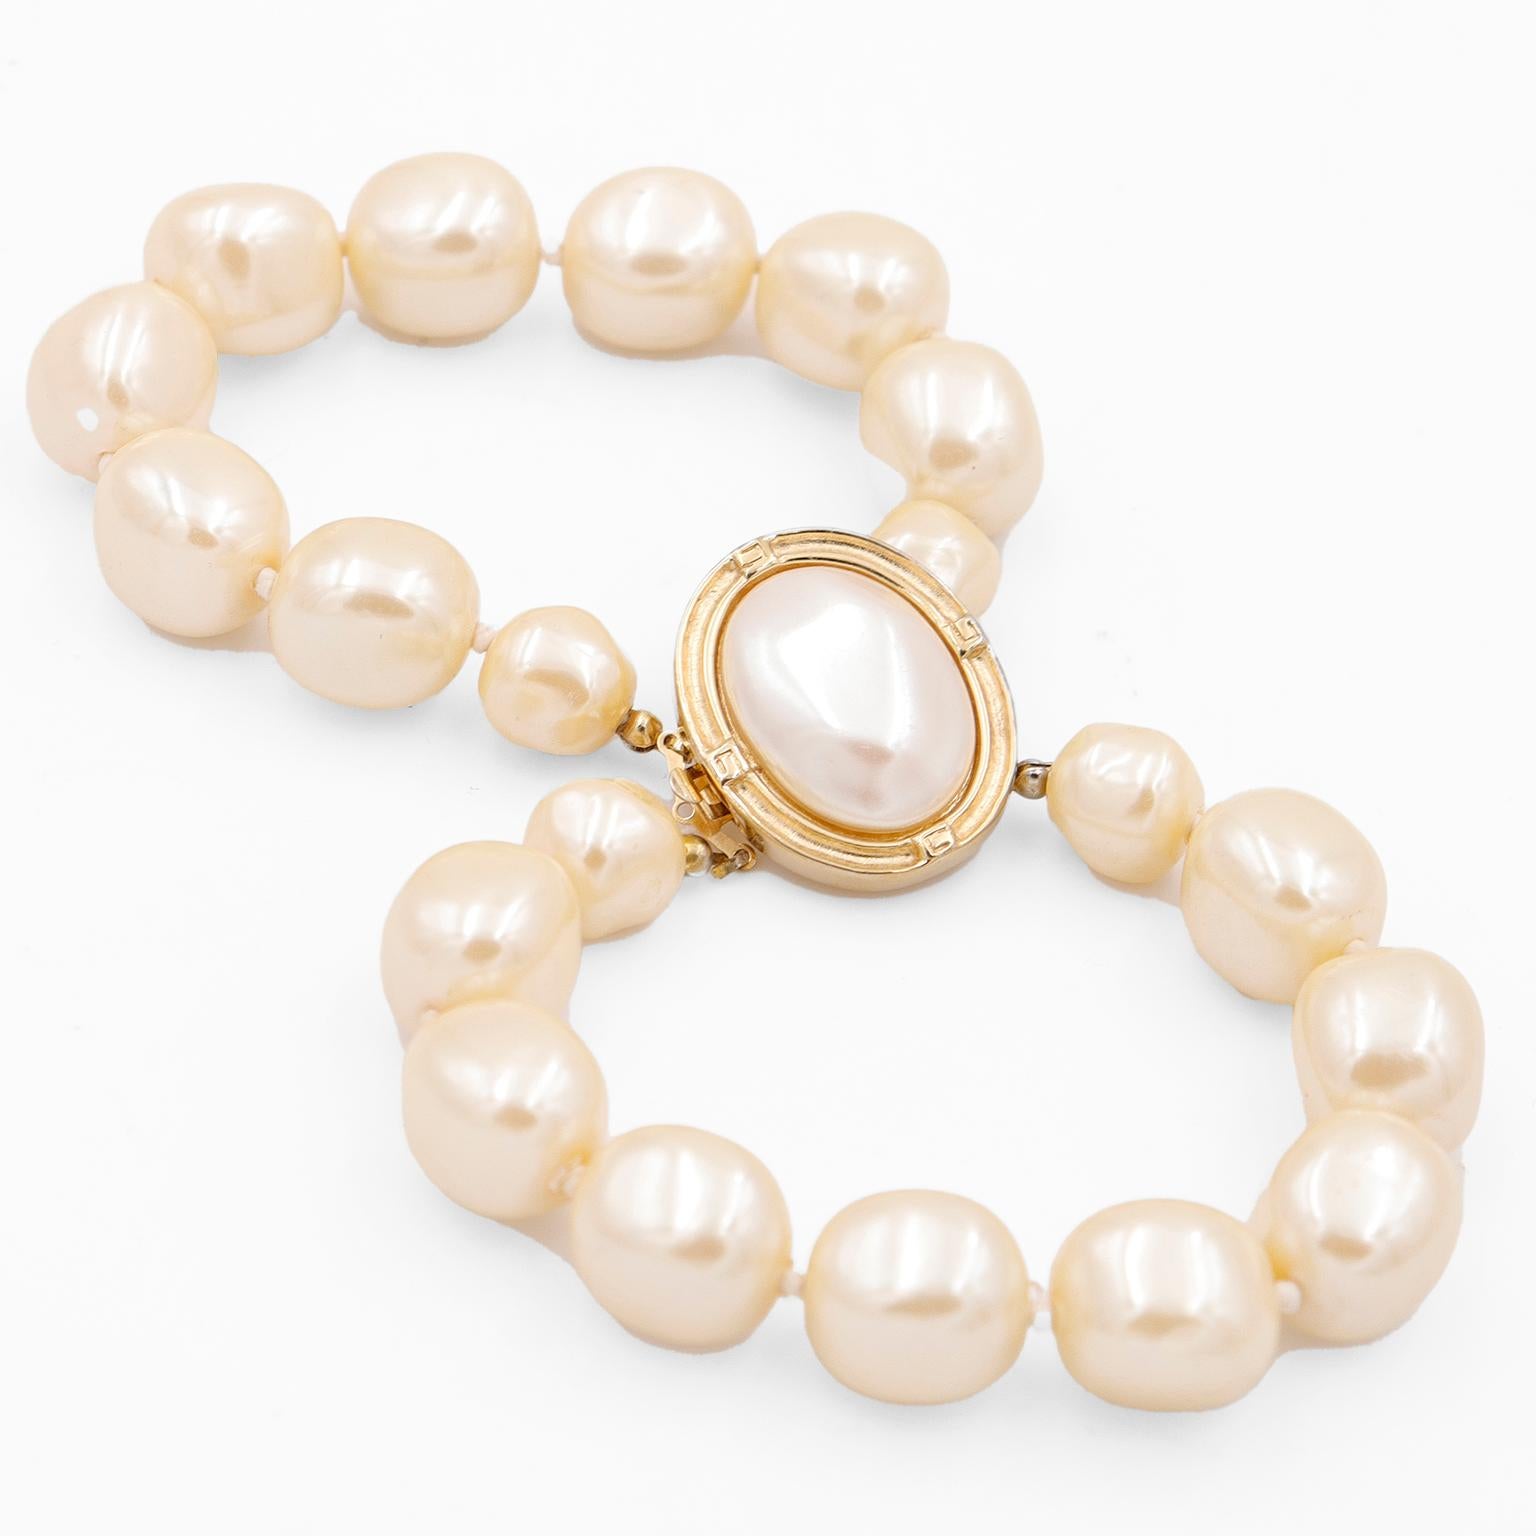 Givenchy Vintage Double Strand Faux Baroque Pearl Bracelet w Gold Plate Clasp For Sale 7